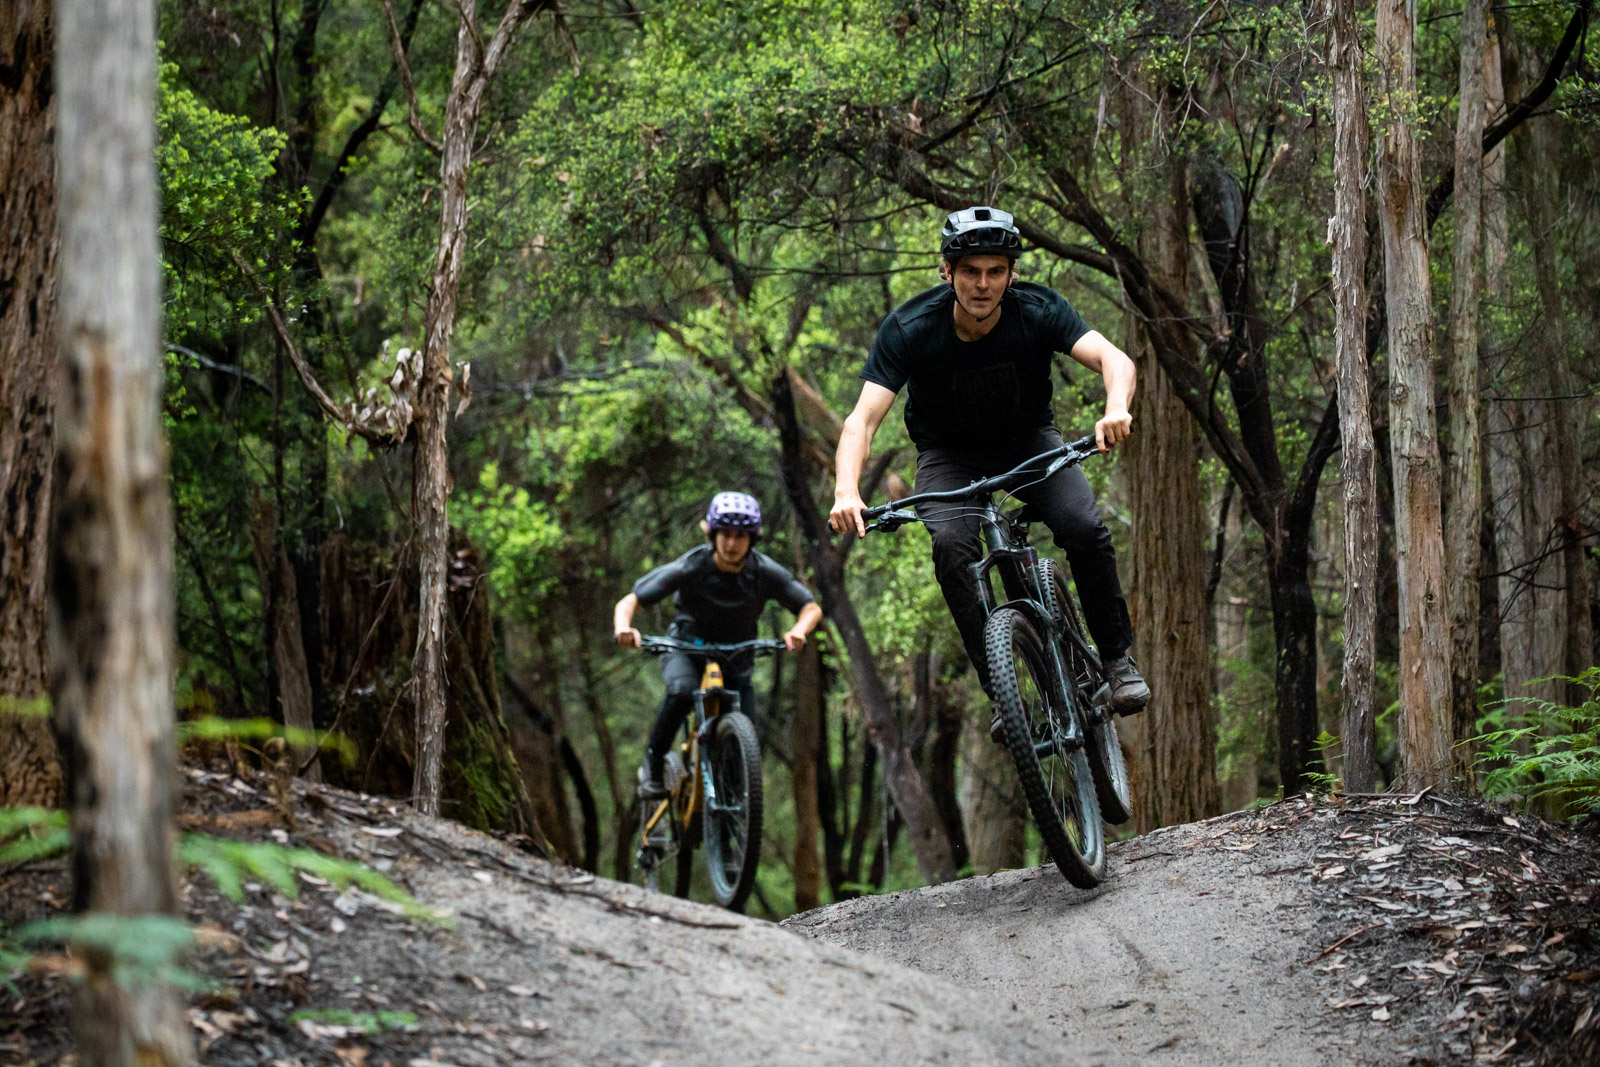 Flickity Sticks in Derby is a great trail, and one of the most popular mountain bike trails in tasmania